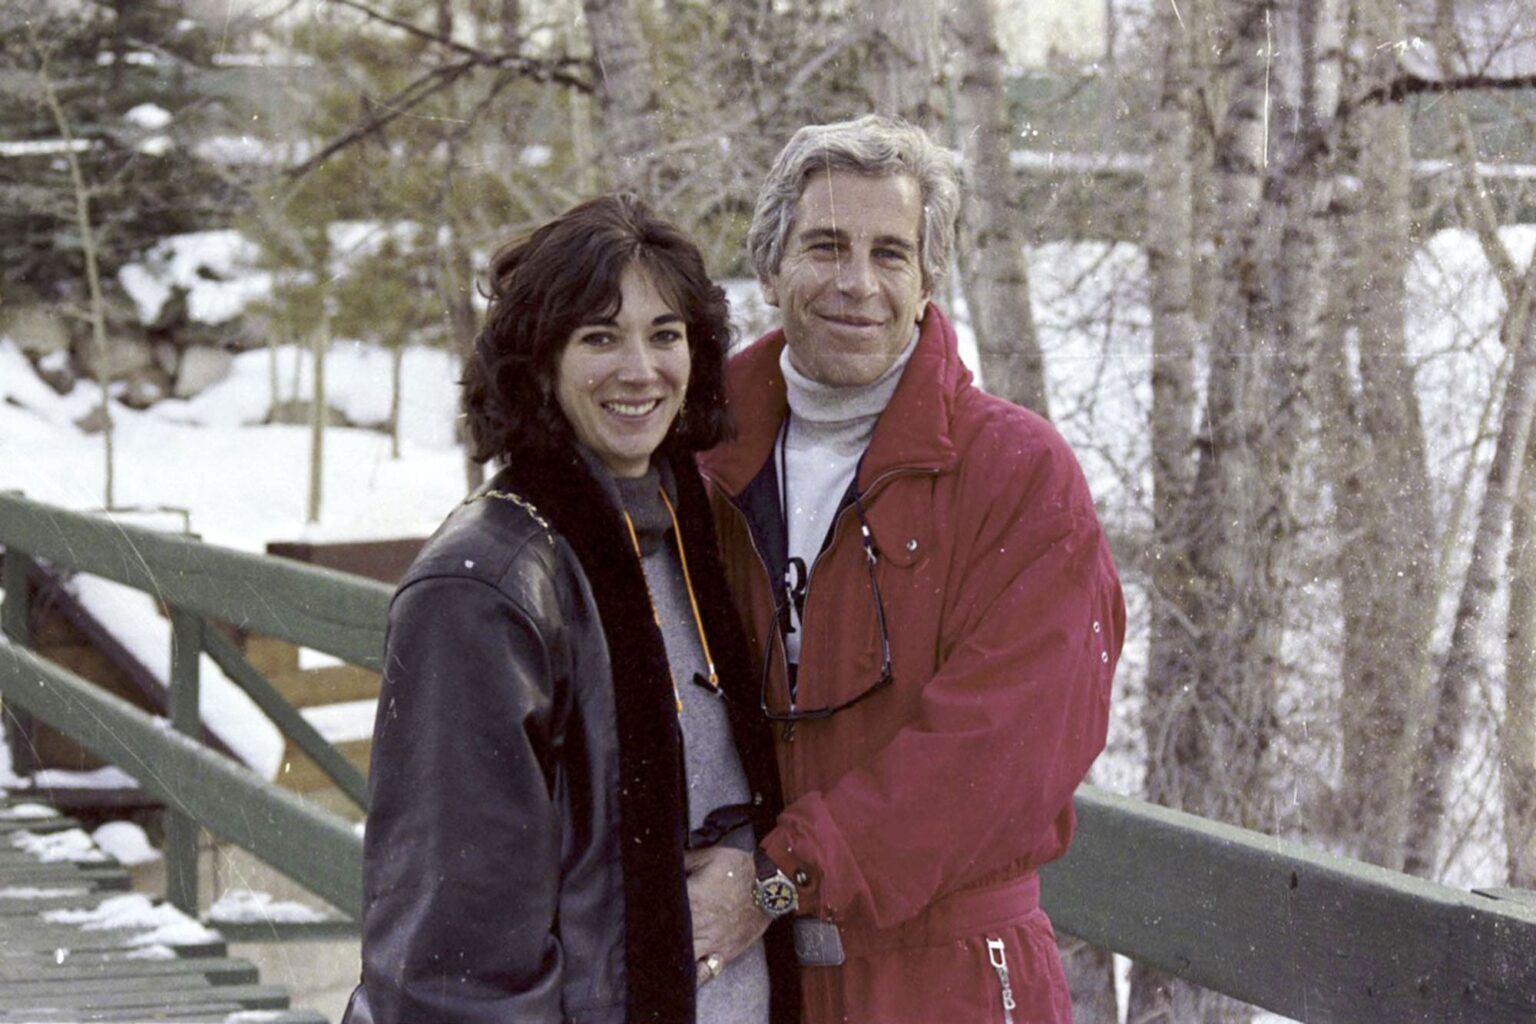 As details of Ghislaine Maxwell and Jeffrey Epstein continue to unravel, a new photo was found of the pair on Queen Elizabeth II's estate. Were they close?